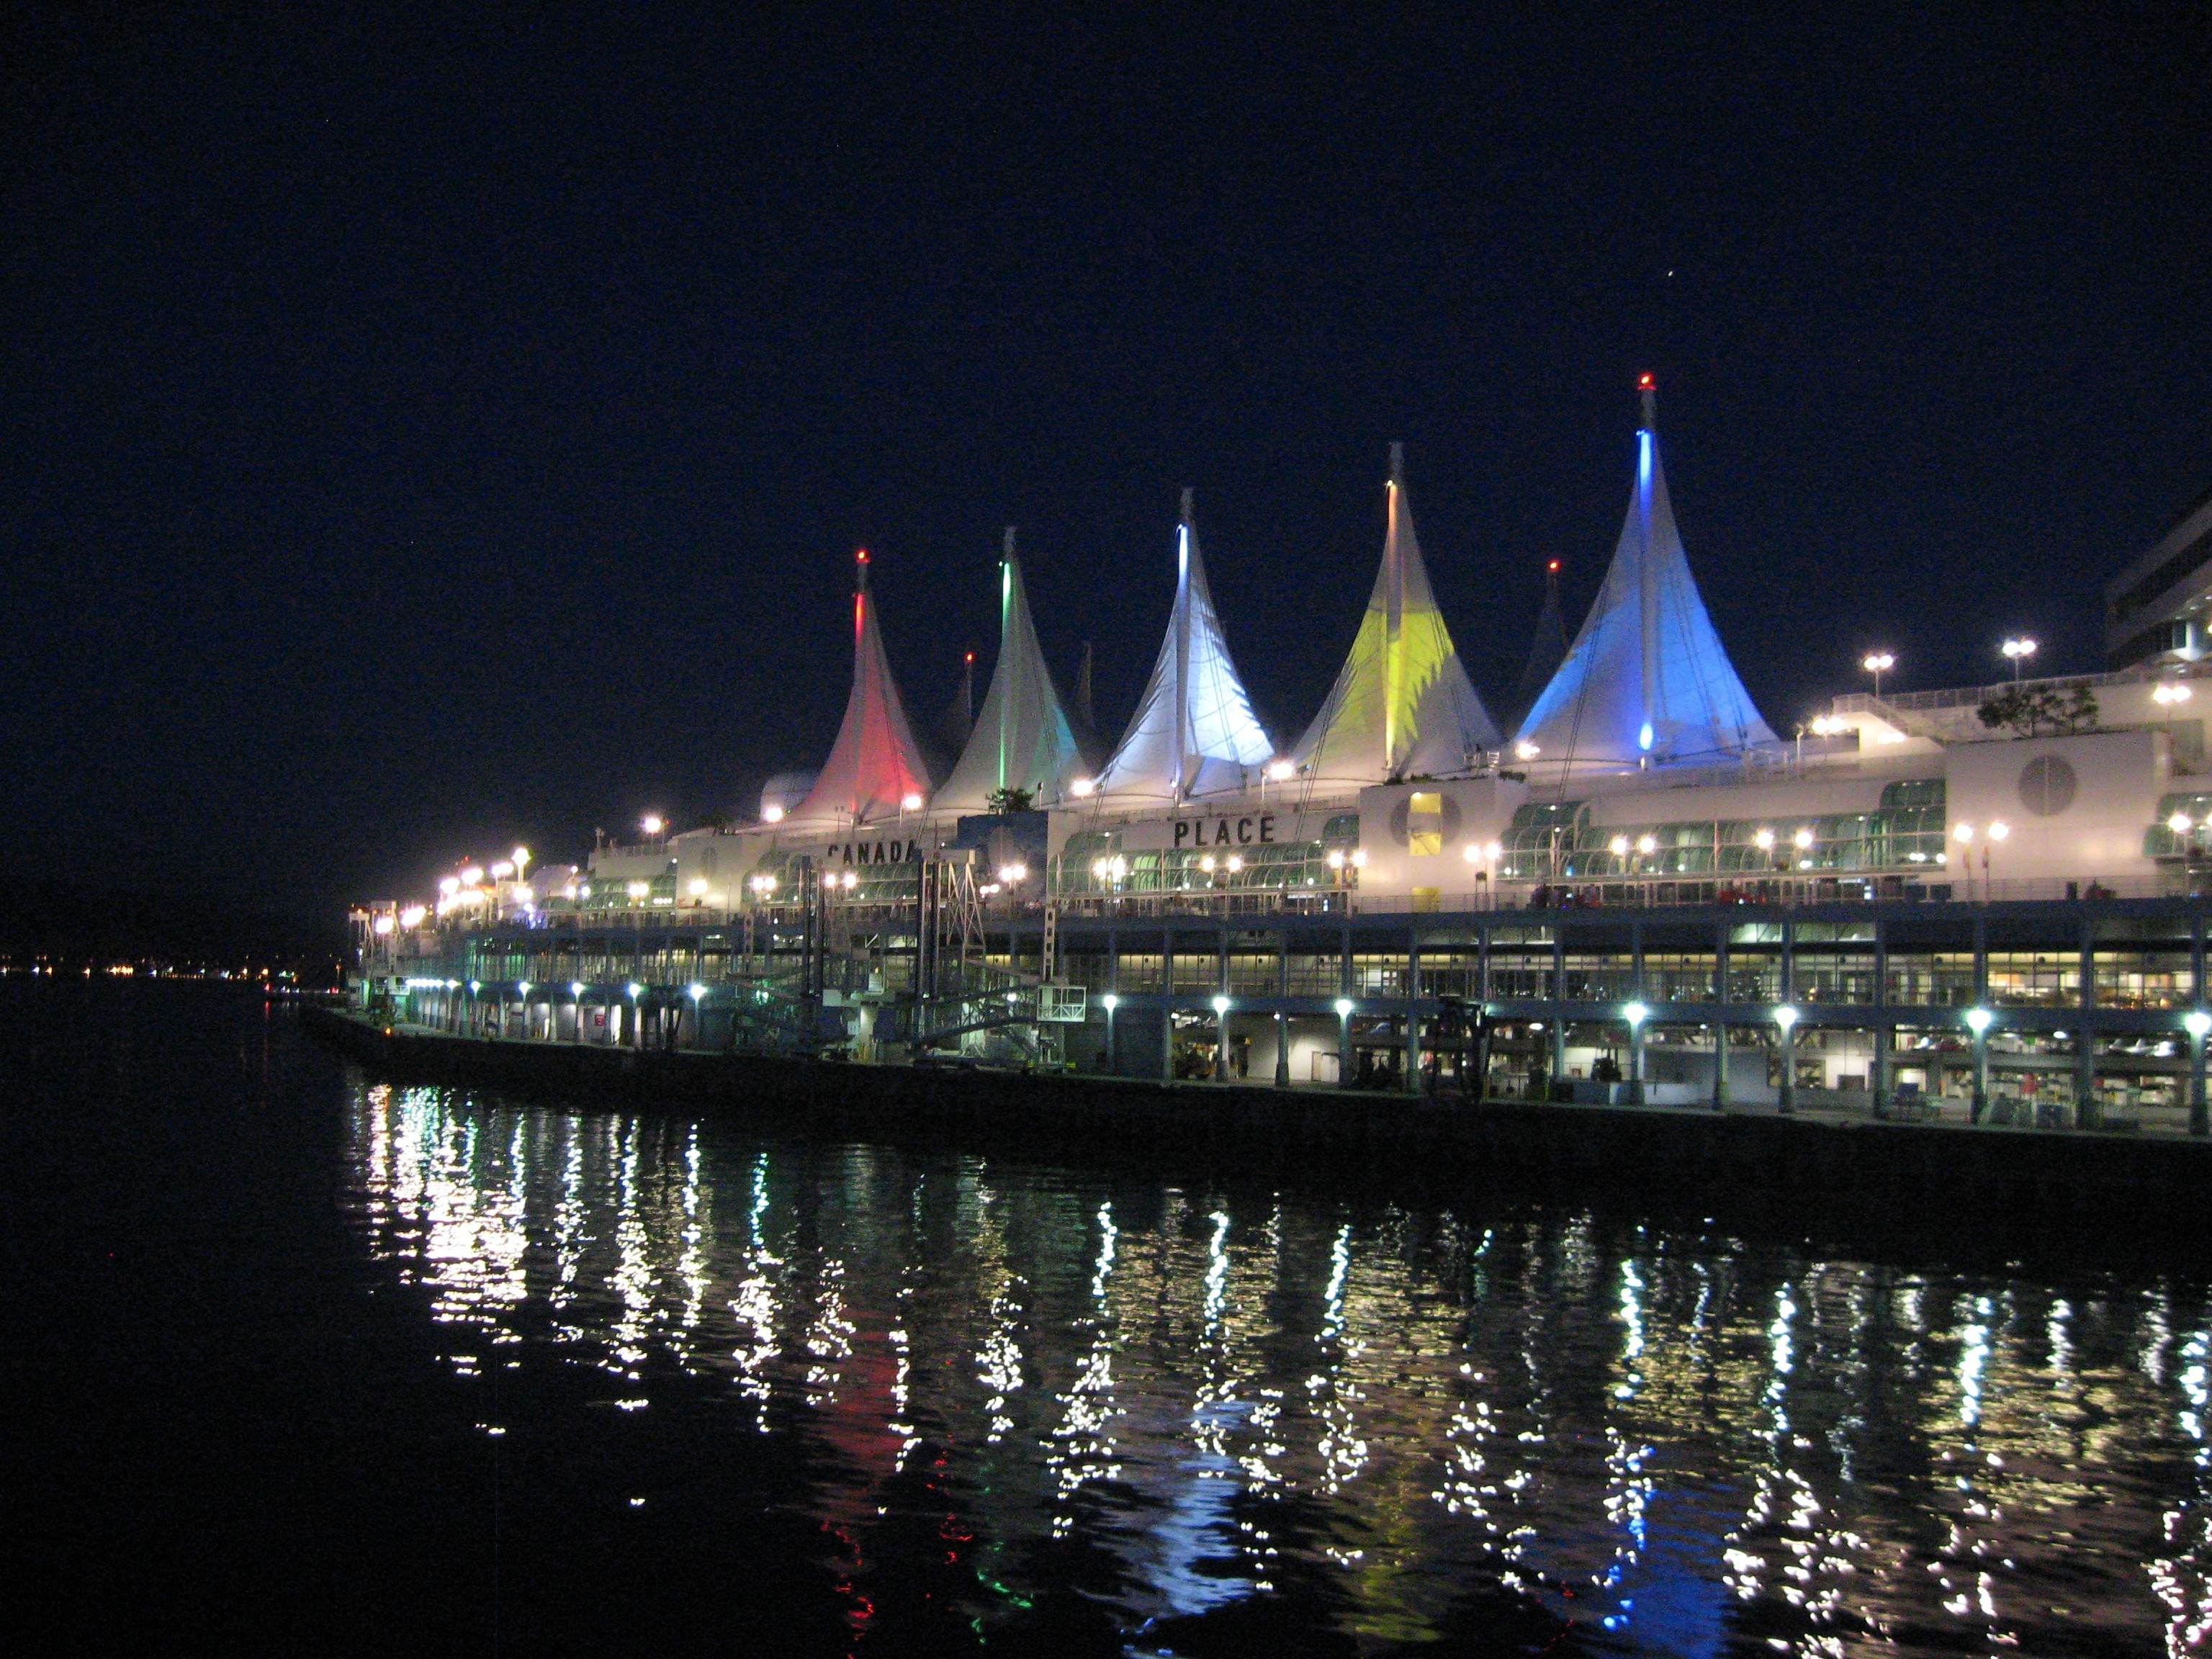 Canada Place in Vancouver illuminated at night